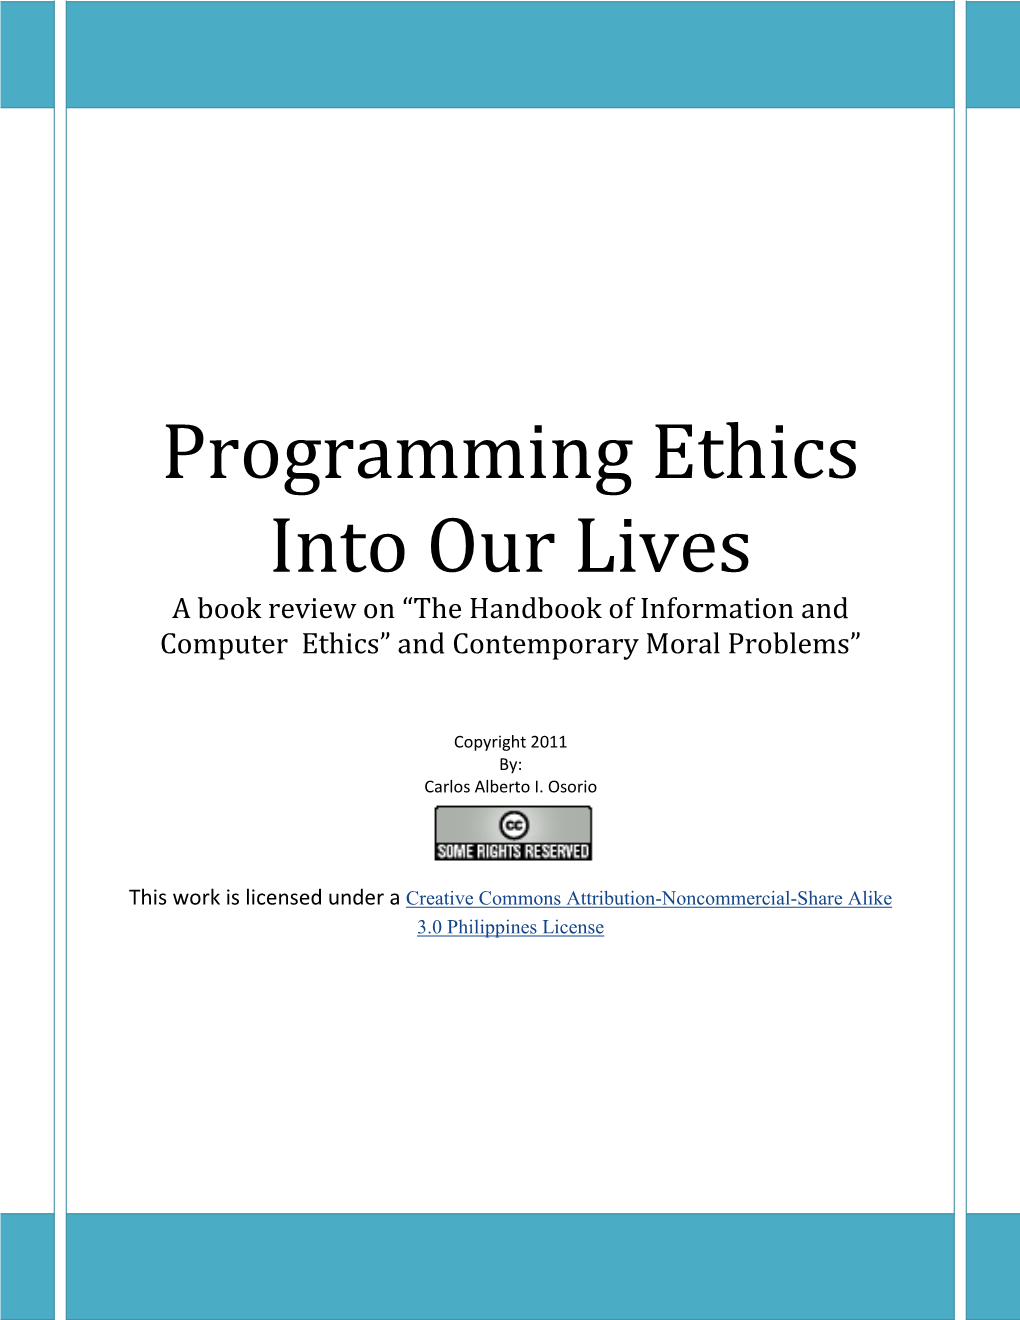 Programming Ethics Into Our Lives a Book Review on “The Handbook of Information and Computer Ethics” and Contemporary Moral Problems”